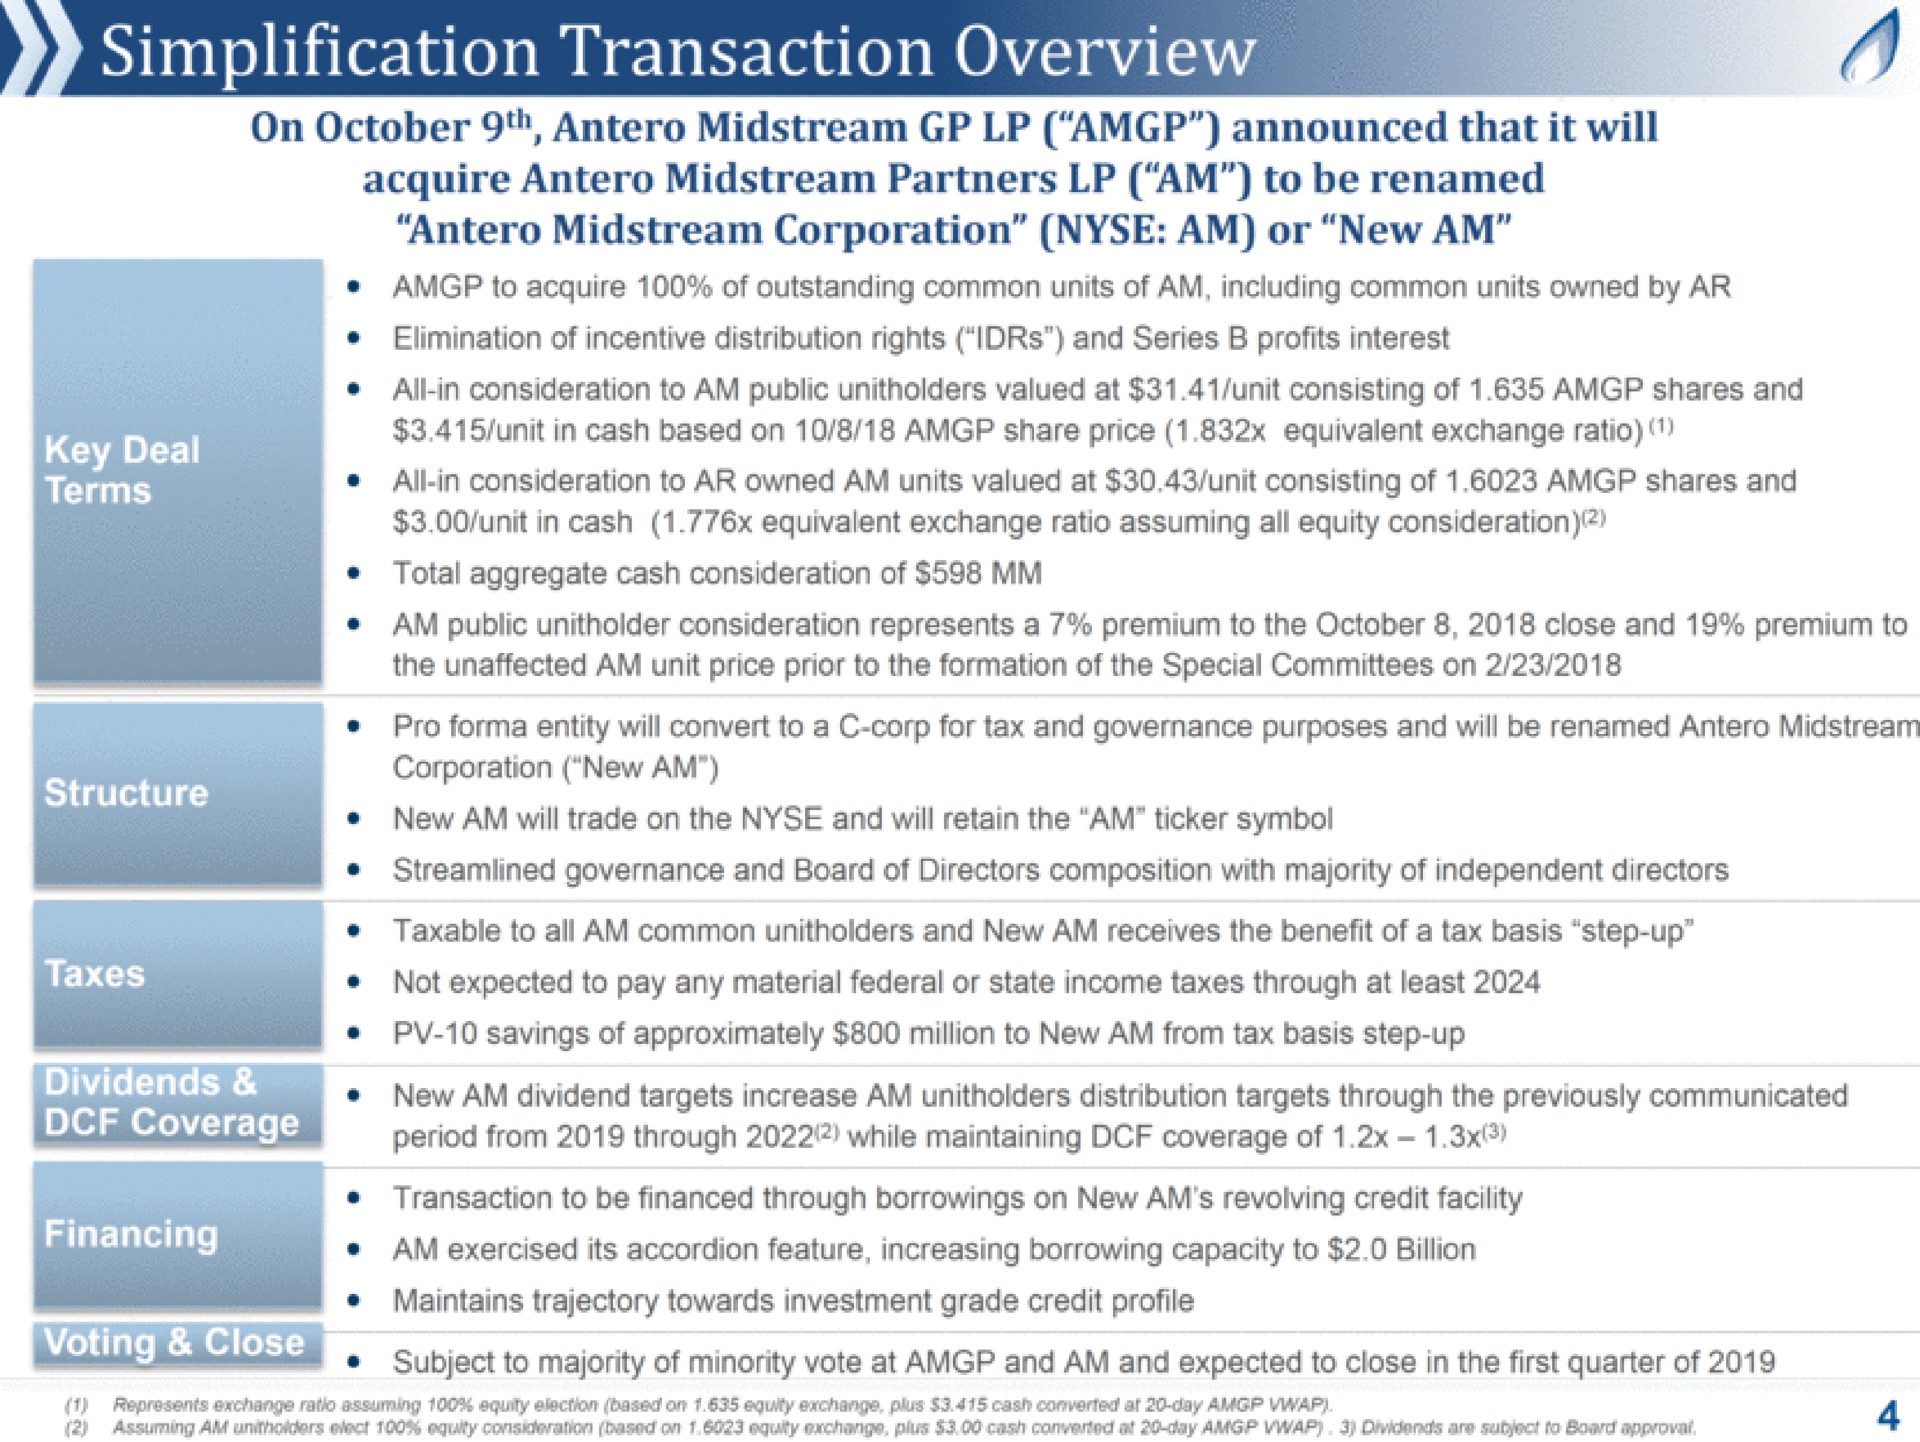 on midstream that it will acquire midstream partners am to be renamed midstream corporation am or new am to acquire of outstanding common units of am including common units owned by elimination of incentive distribution rights and series profits interest all in consideration to am public valued at unit consisting of shares and unit in cash based on share price equivalent exchange ratio all in consideration to owned am units valued at unit consisting of shares and unit in cash equivalent exchange ratio assuming all equity consideration total aggregate cash consideration of am public consideration represents a premium to the close and premium to the unaffected am unit price prior to the formation of the special committees on pro entity will convert to a corp for tax and governance purposes and will be renamed midstream corporation new am new am will trade on the and will retain the am ticker symbol streamlined governance and board of directors composition with majority of independent directors taxable to all am common and new am receives the benefit of a tax basis step up not expected to pay any material federal or state income taxes through at least savings of approximately million to new am from tax basis step up new am dividend targets increase am distribution targets through the previously communicated period from through while maintaining coverage of transaction to be financed through borrowings on new am revolving credit facility am exercised its accordion feature increasing borrowing capacity to billion maintains trajectory towards investment grade credit profile subject to majority of minority vote at and am and expected to close in the first quarter of las an coverage financing bee represents exchange ratio assuming based on equity exchange cash converted day wap assuming am equity consideration based on equity exchange plus cash converted day dividends subject board approval | Antero Midstream Partners